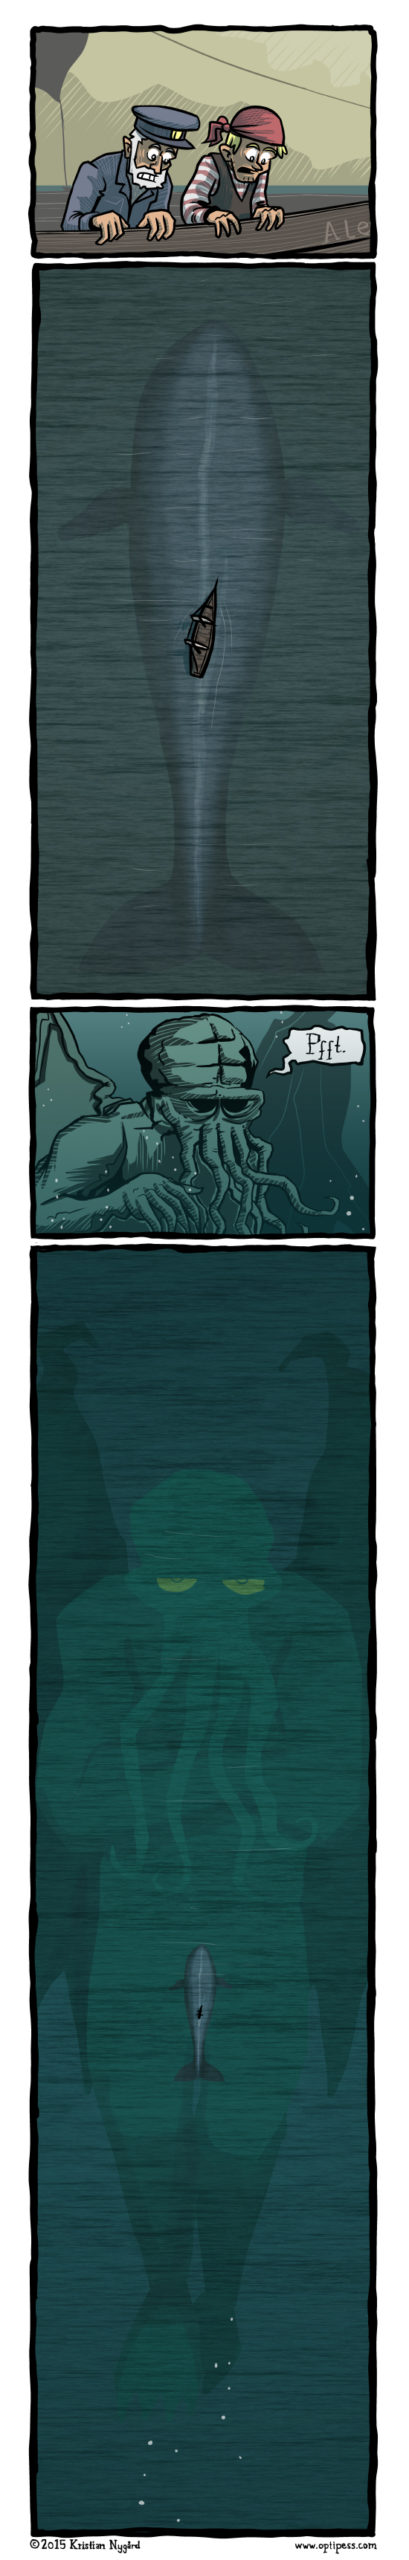 The seamen instantly went insane just as soon as they saw Cthulhuâ€™s massive, impressiveâ€¦ eyes.